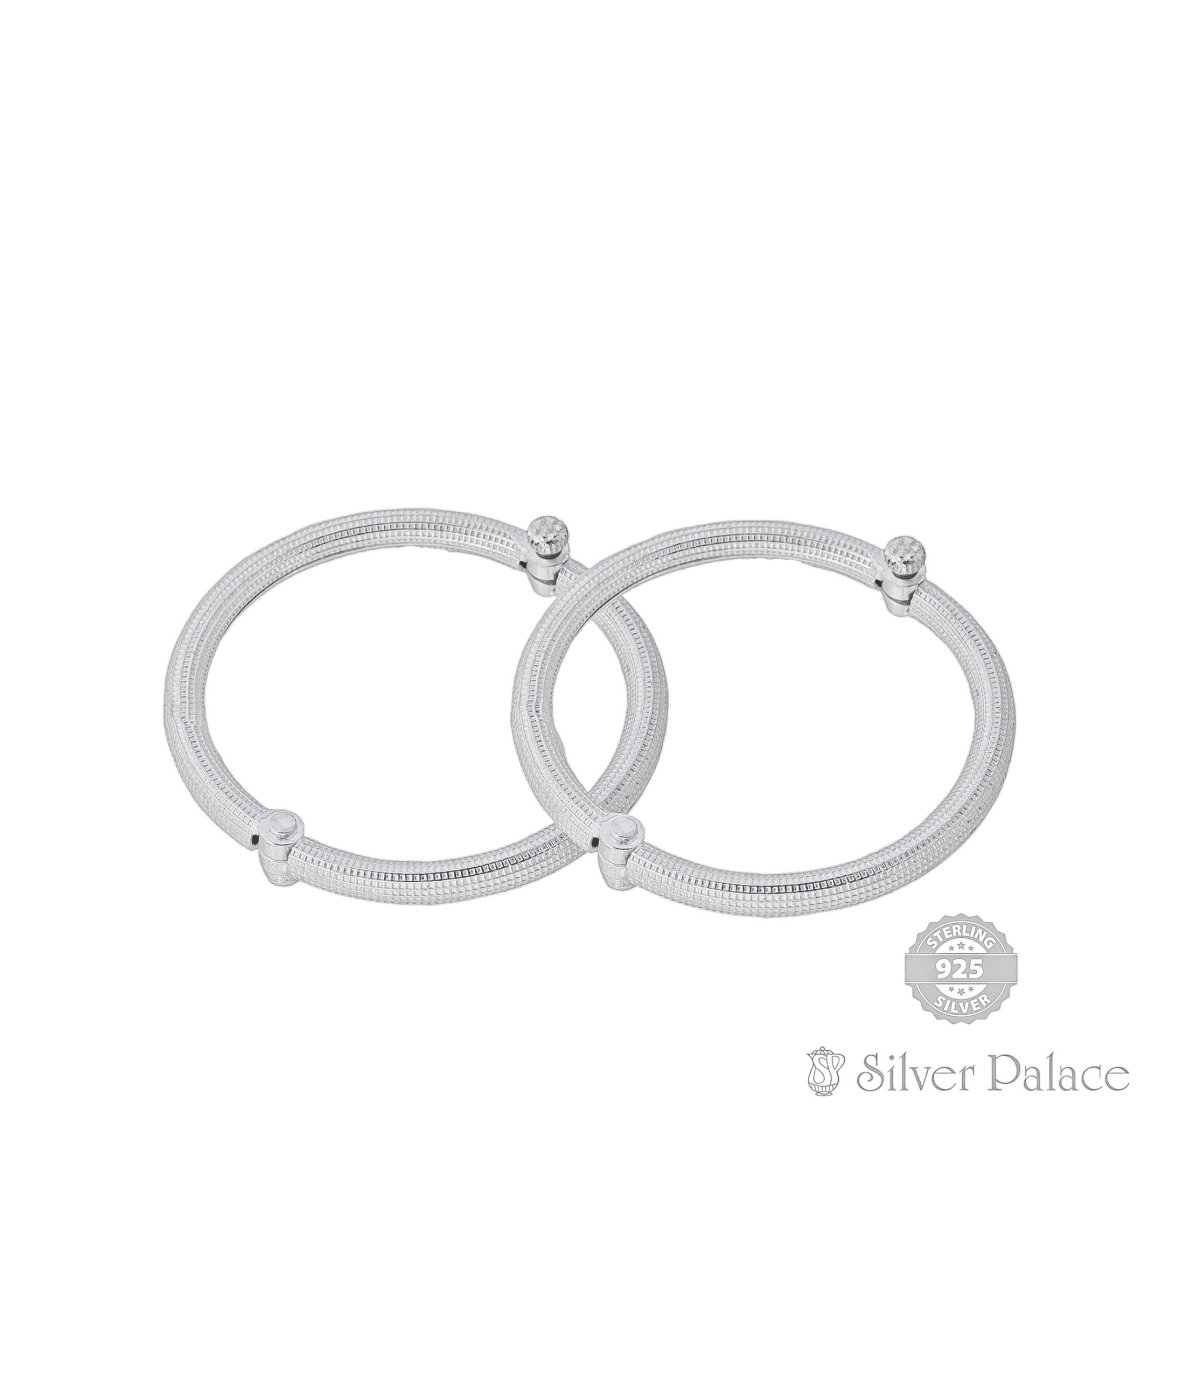 92.5 SILVER PLAIN BABY ANKLET 